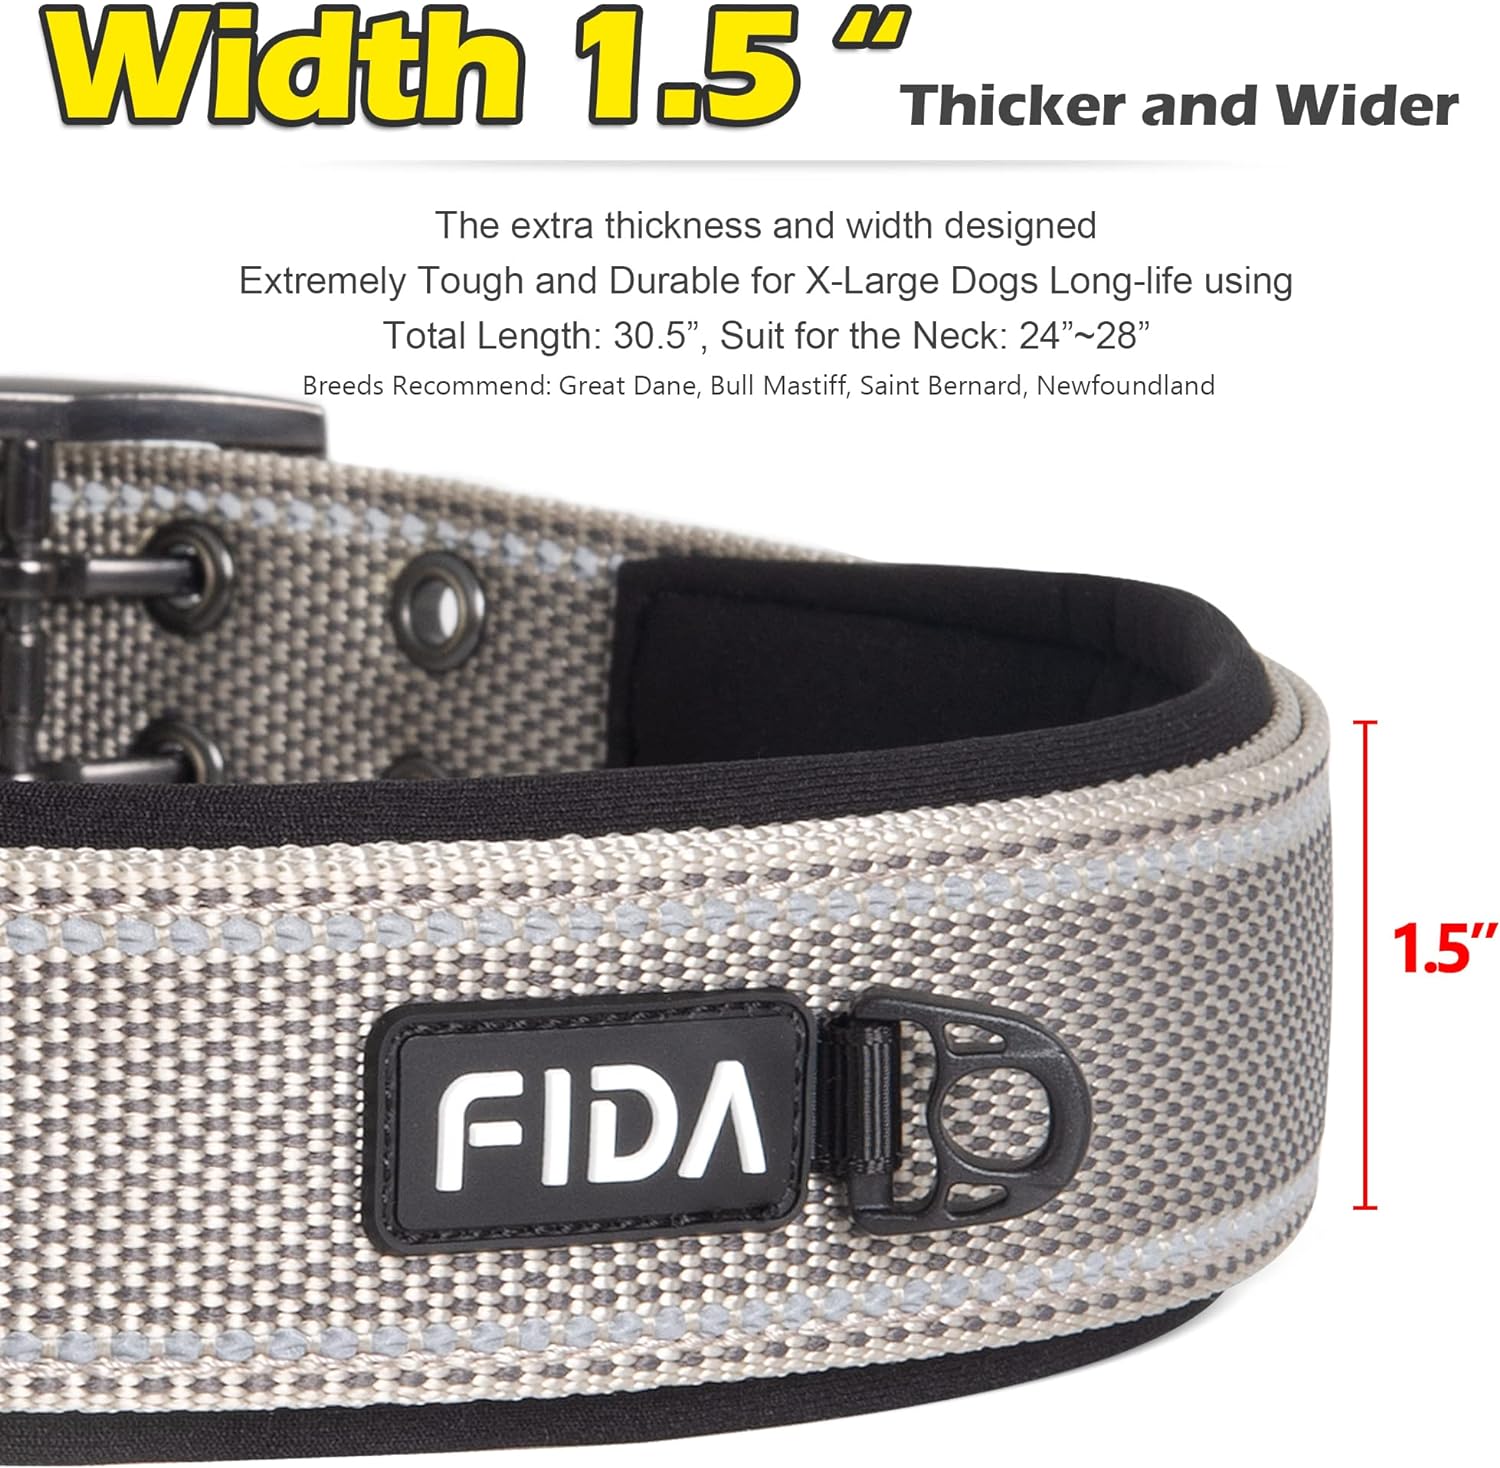 Fida Heavy Duty Dog Collar, Ultra Comfortable Soft Neoprene Padded, Adjustable Reflective Nylon Pet Collar with Durable Metal Belt Buckle for Small Breeds (S, Blue)